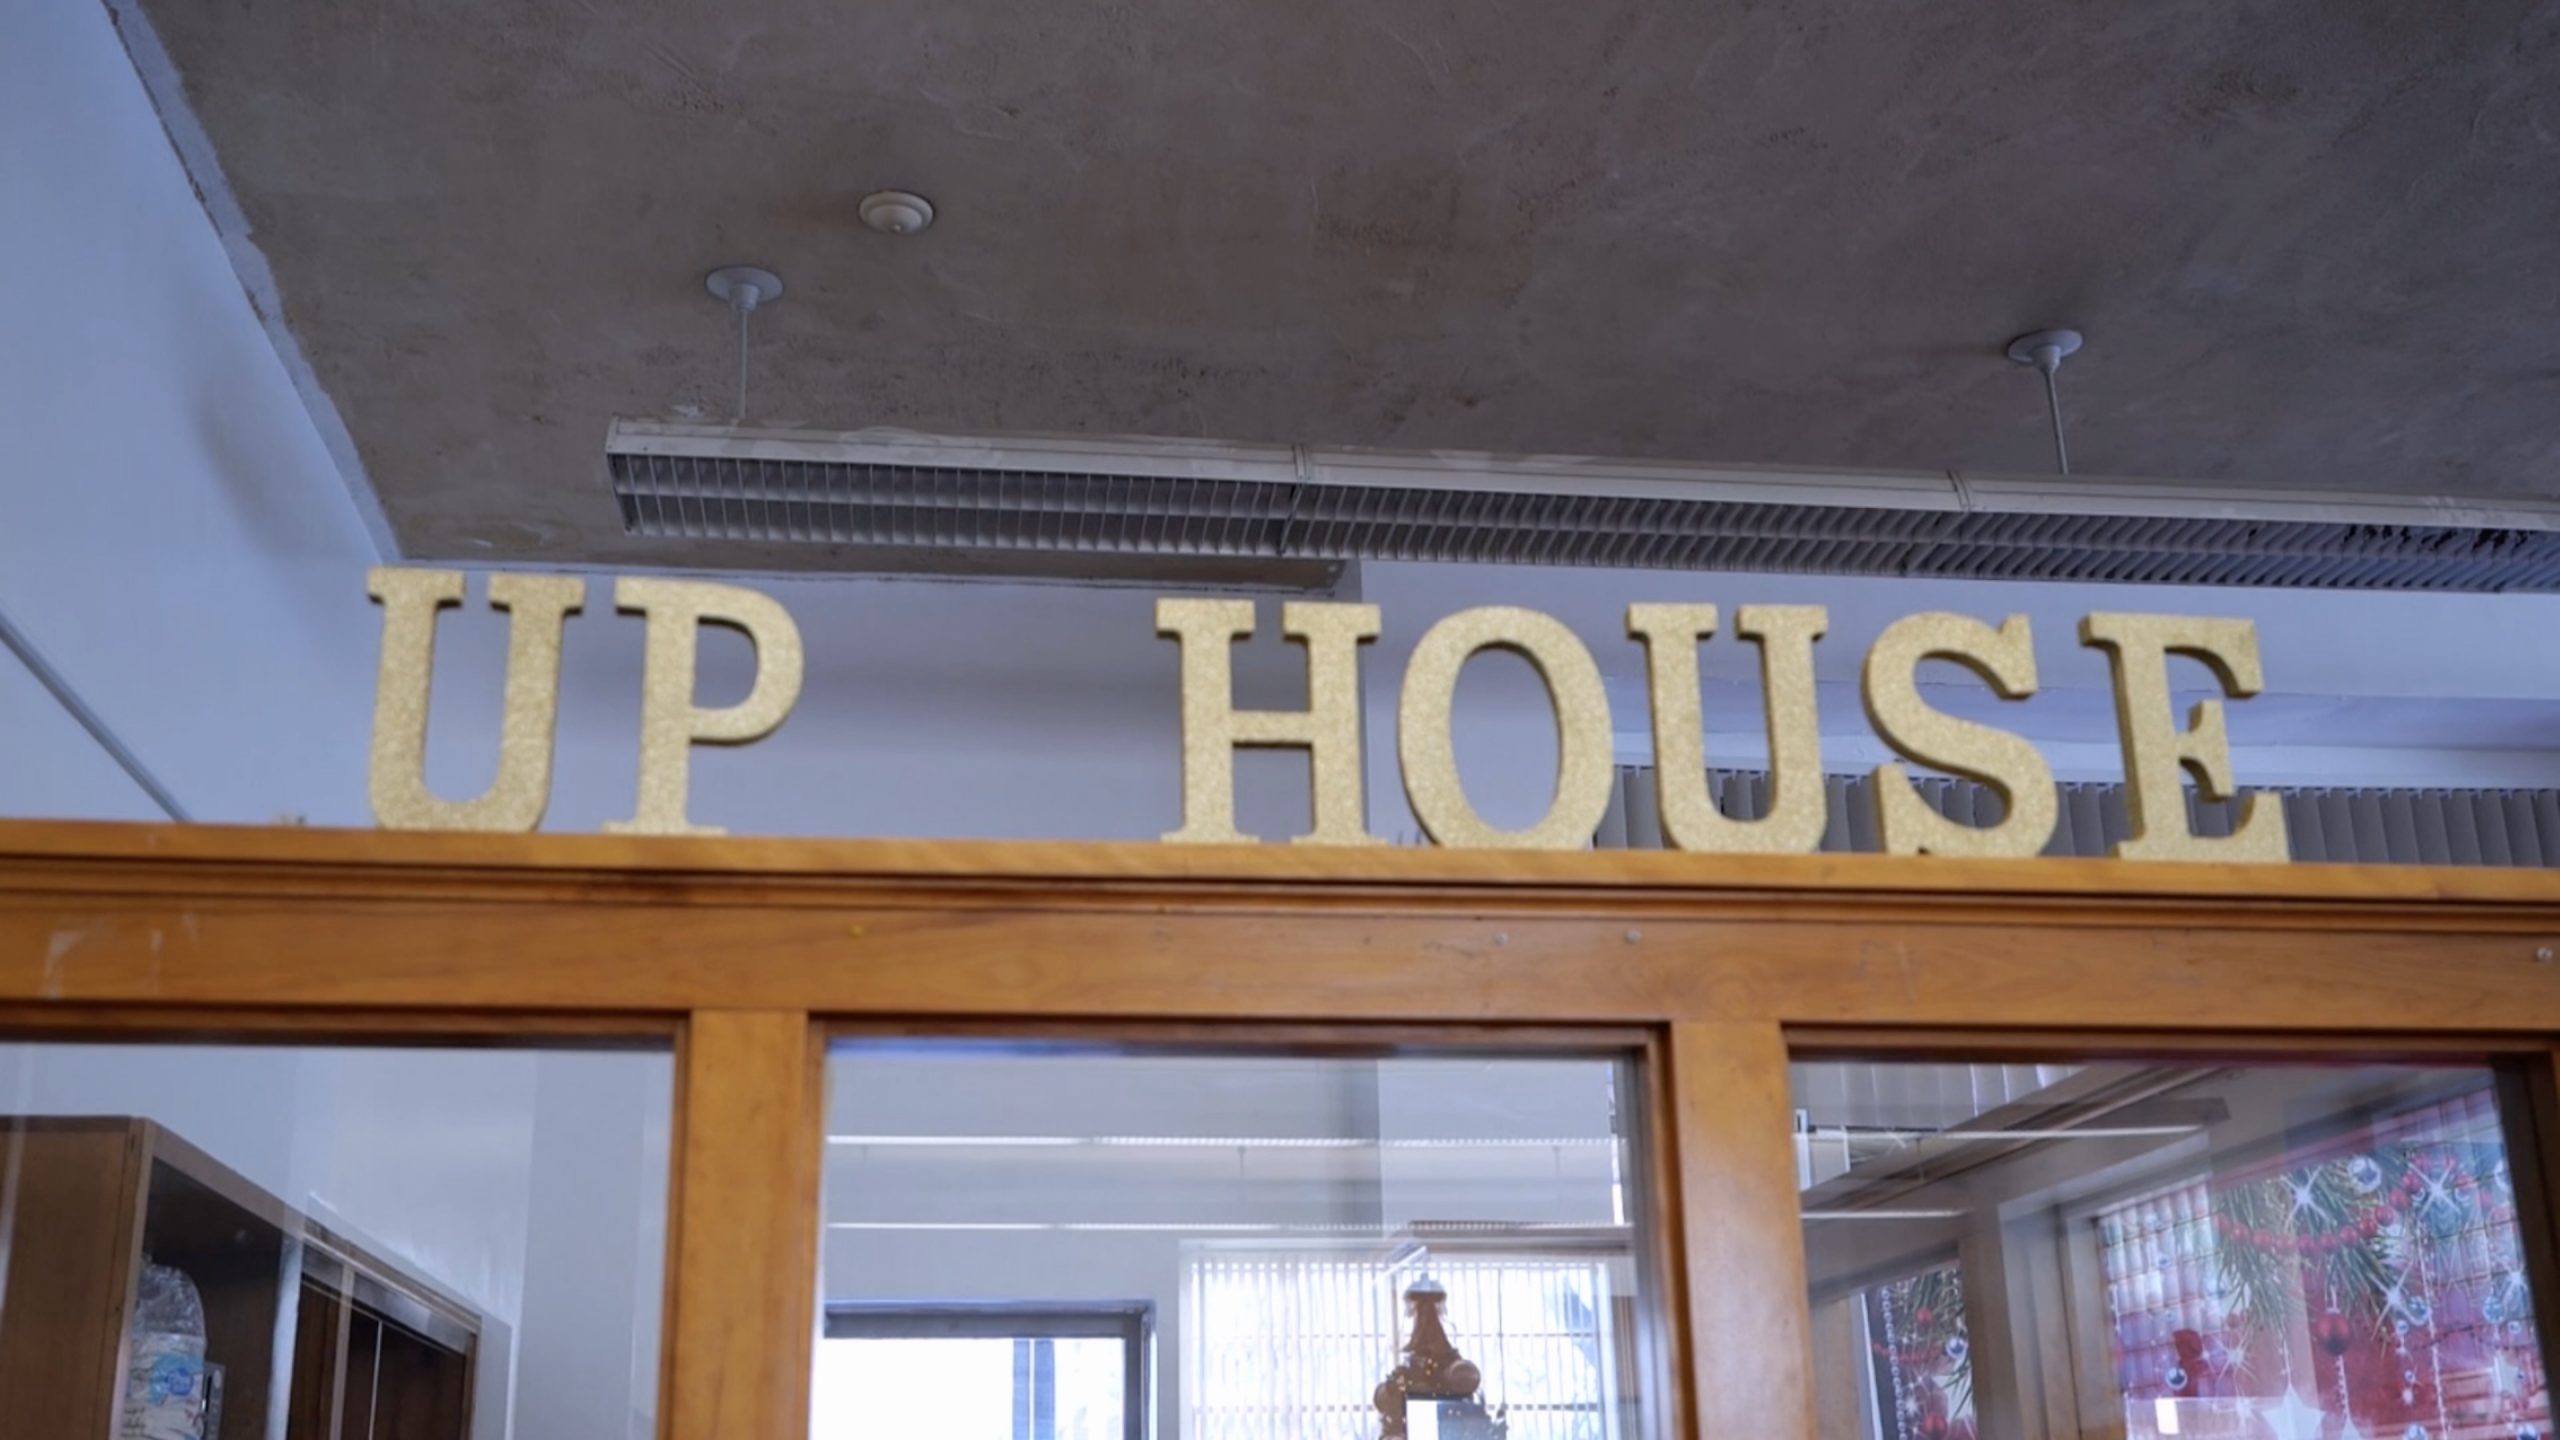 UP HOUSE sign